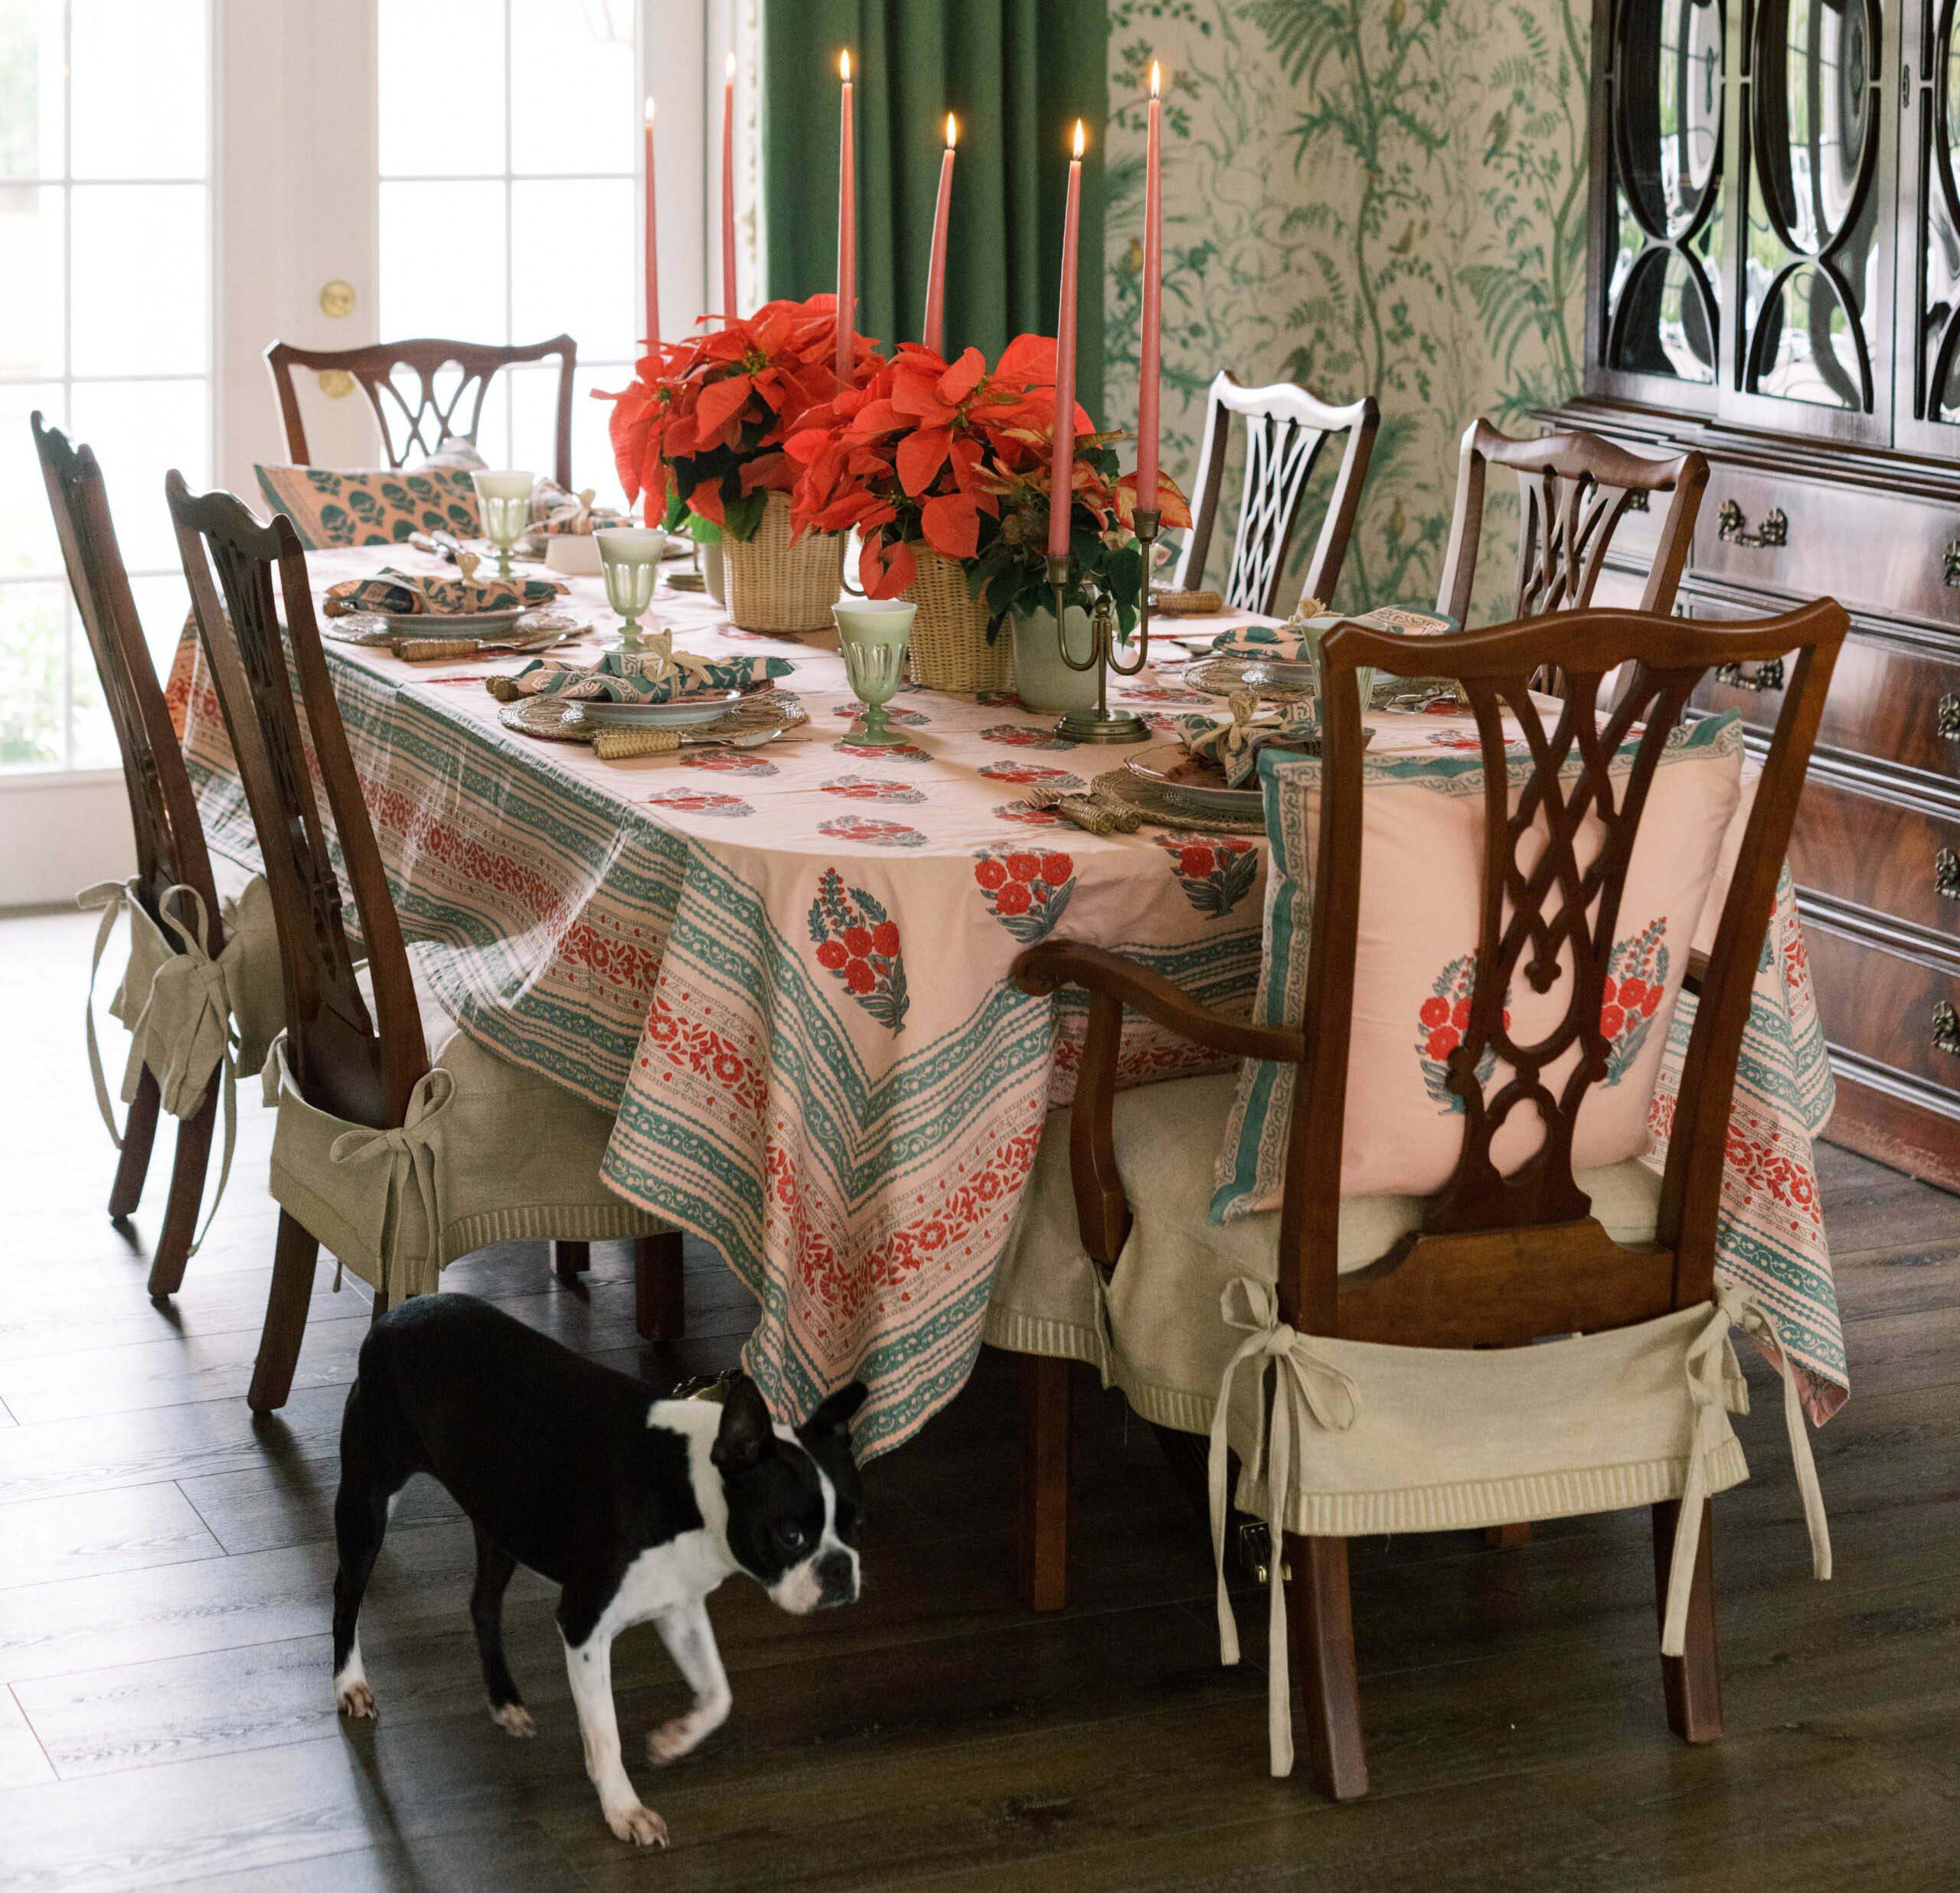 Full view of a holiday dining table setting. ready for a holiday party, covered by a traditional Pink Indian block print table cloth with floral motifs.